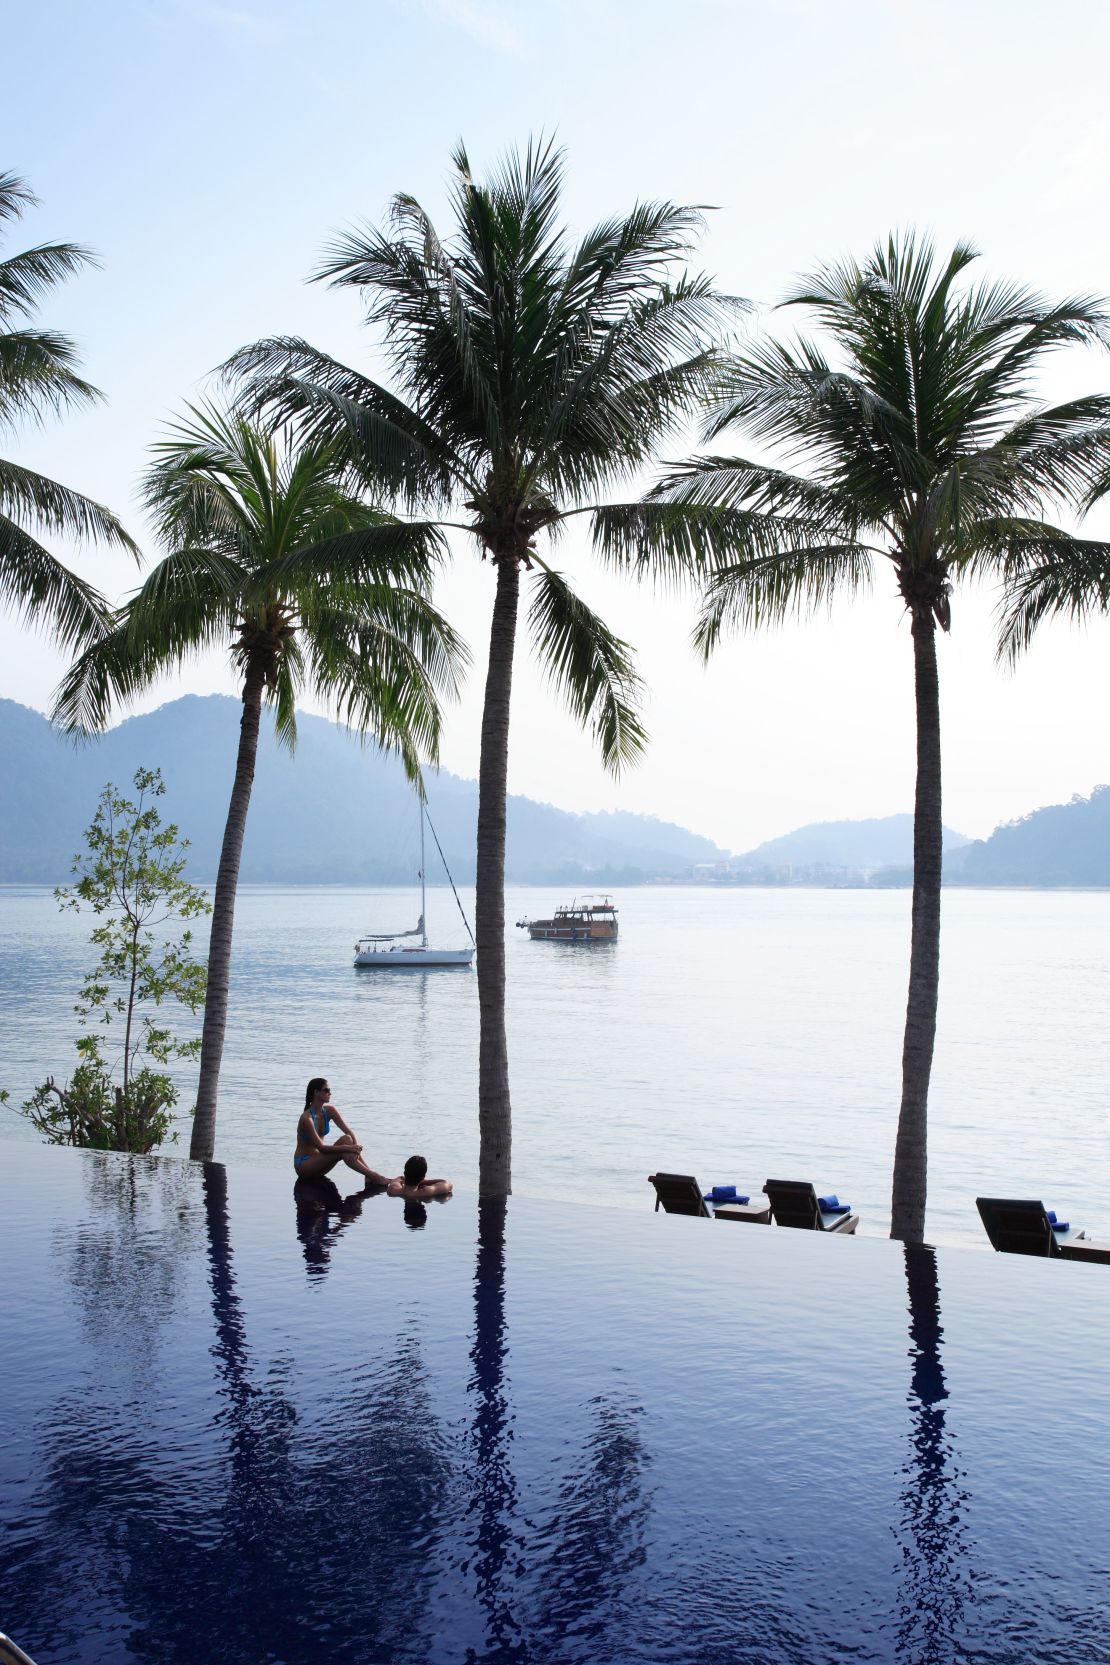 Pangkor Laut guests get their own two million-year-old rainforest to play around in.